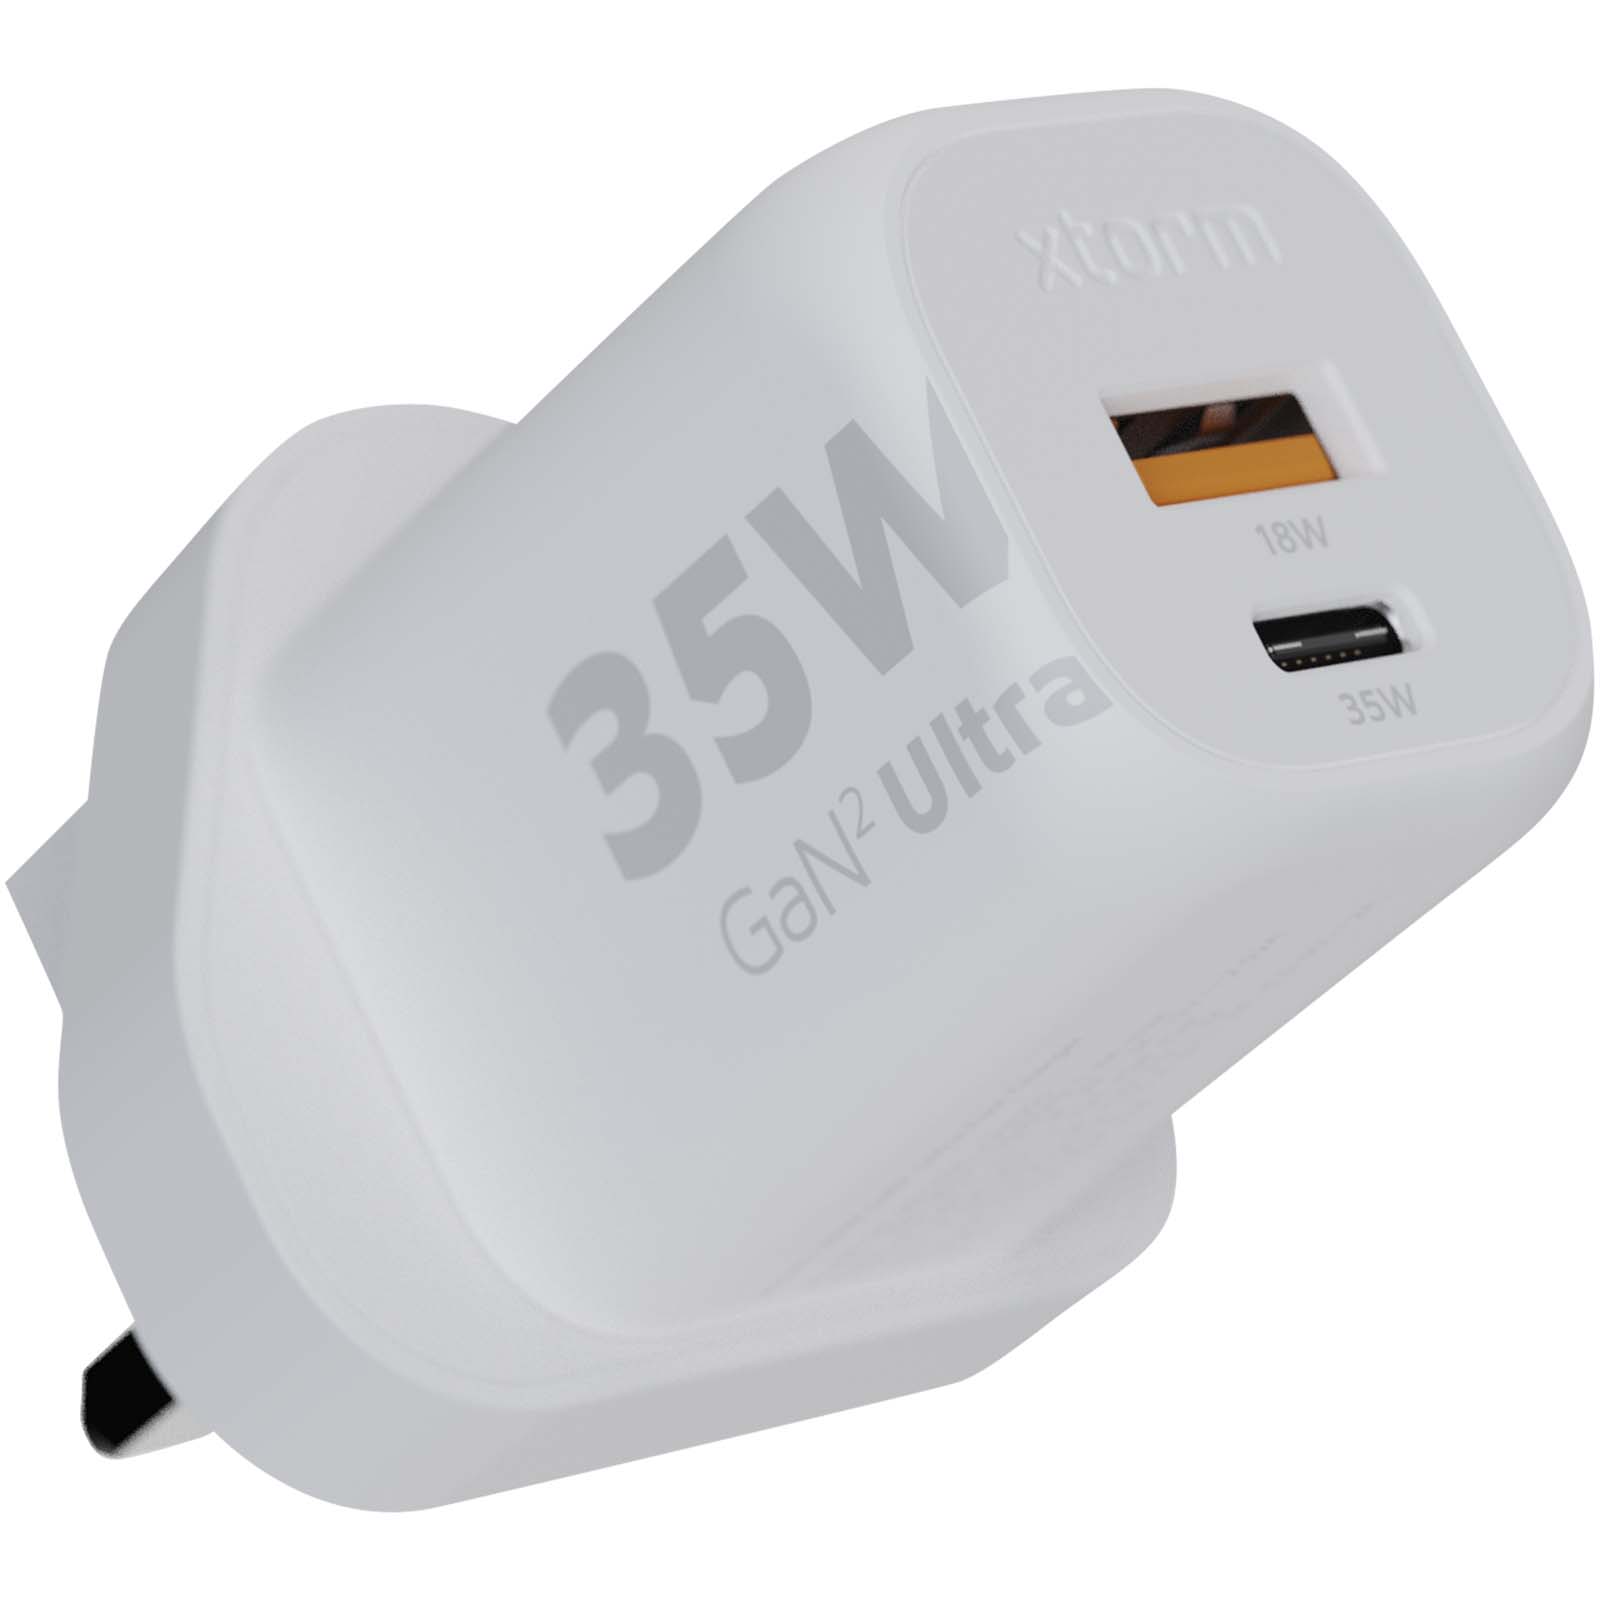 Advertising Chargers - Xtorm XEC035 GaN² Ultra 35W wall charger - UK plug - 0